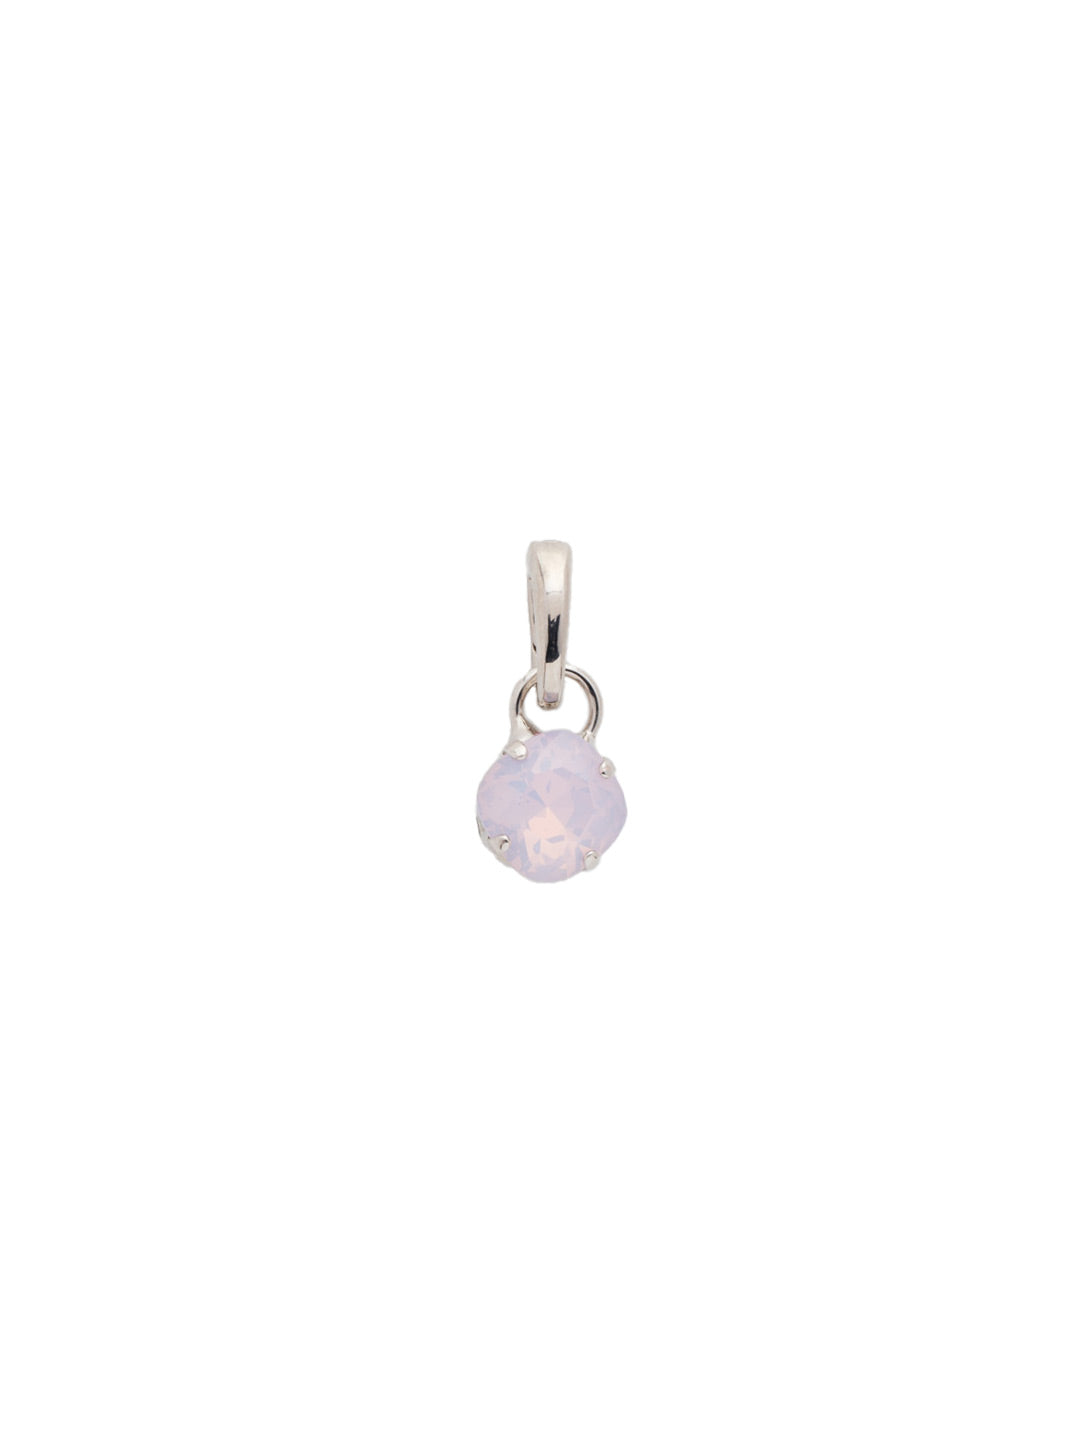 October Birthstone Rosewater Charm - CEU1RHROW - <p>A cushion-cut crystal designed in your beautiful birthstone. Simply attach it to our favorite chain for an everyday look. From Sorrelli's Rose Water collection in our Palladium Silver-tone finish.</p>